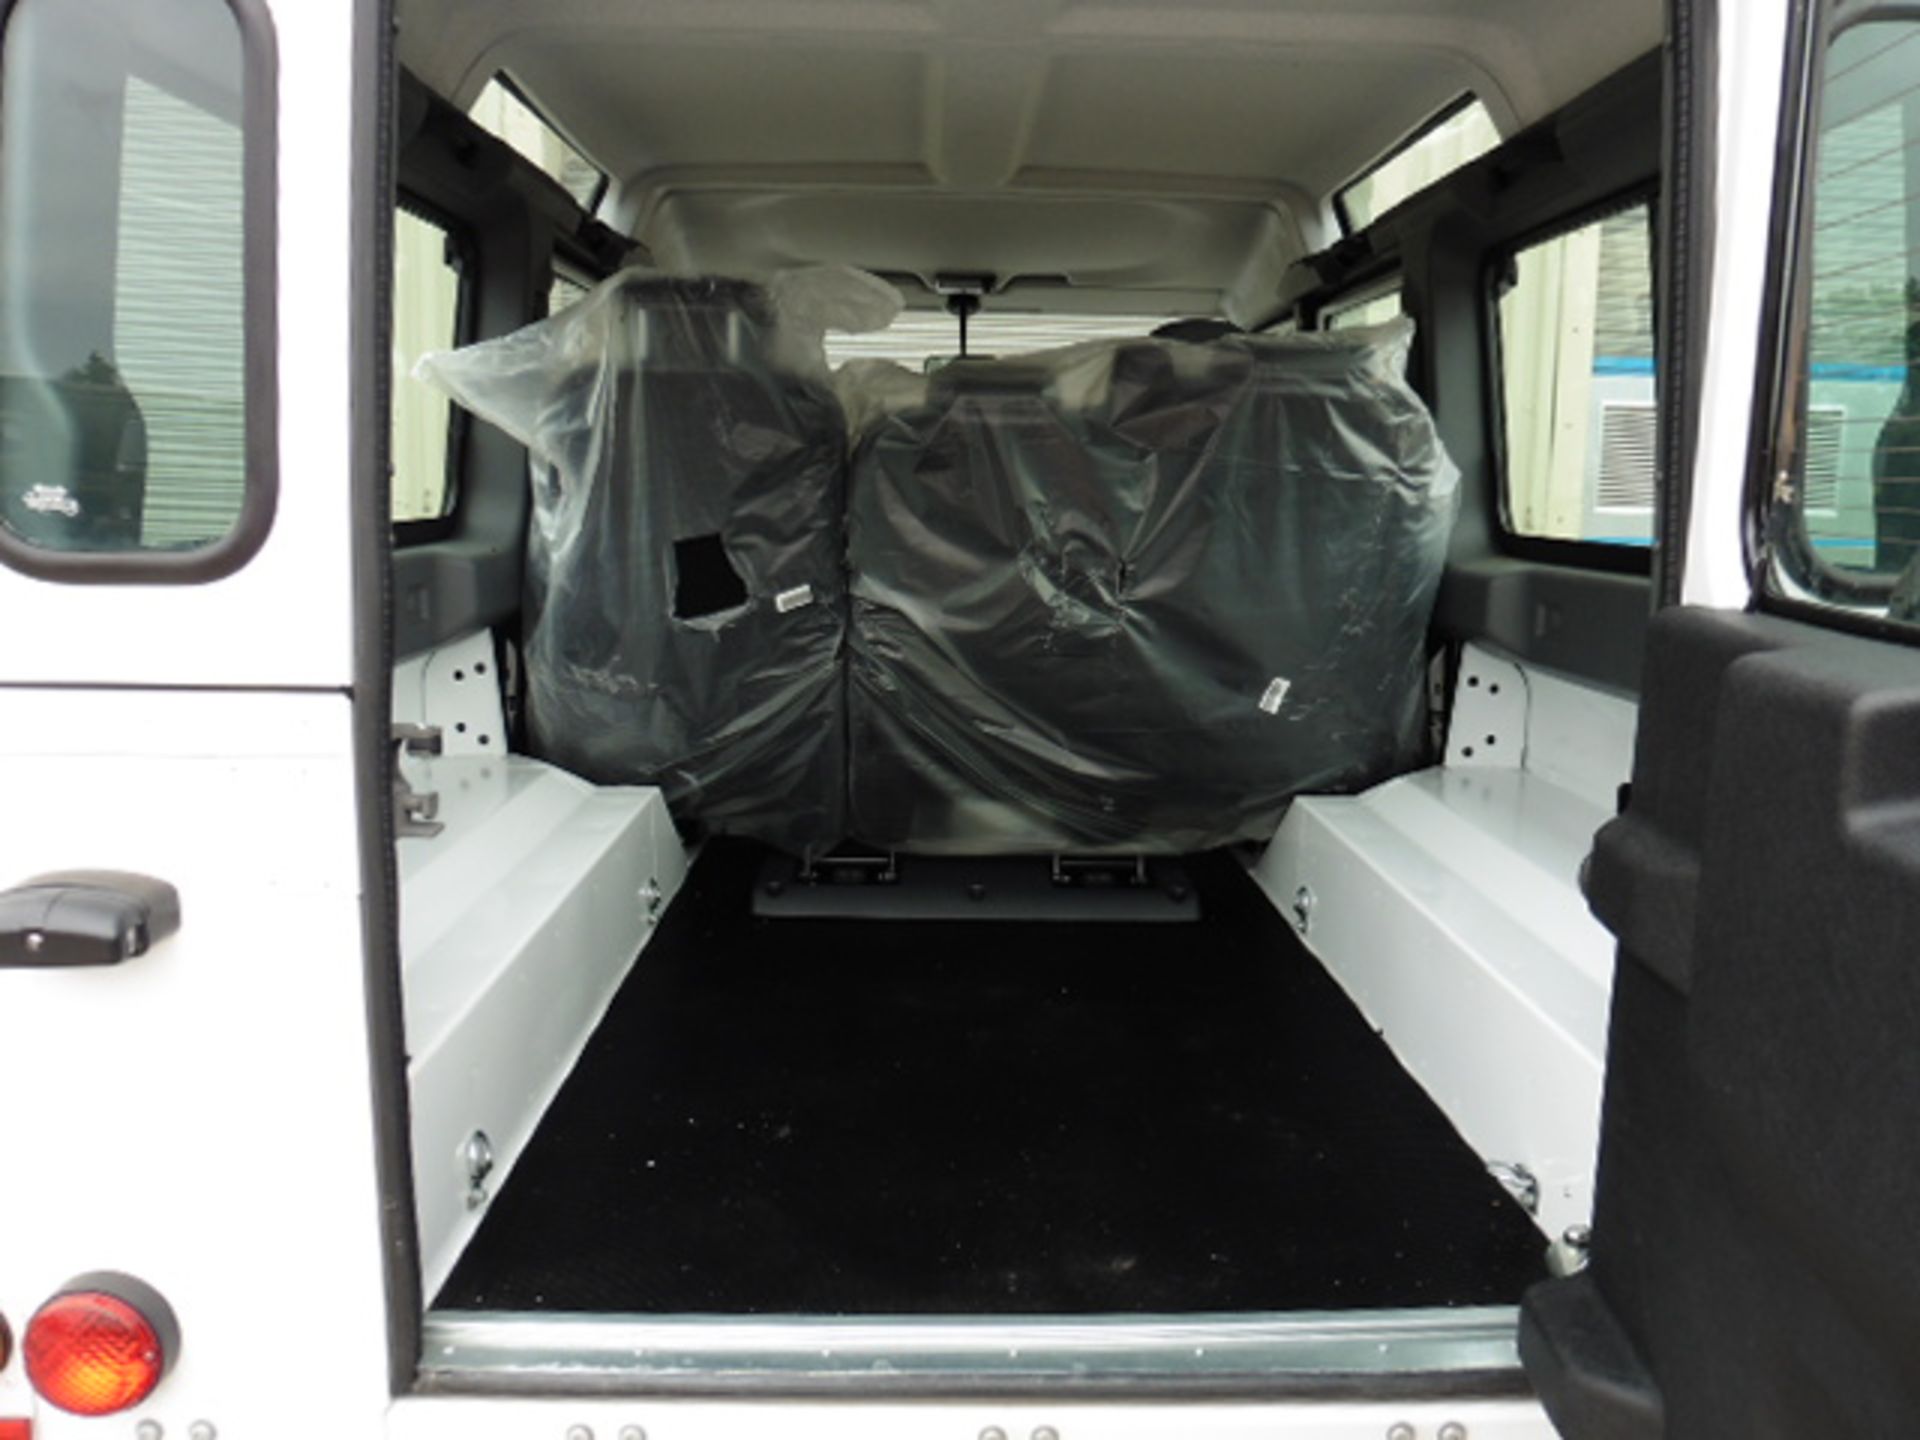 Delivery Mileage 2013 model year Land Rover Defender 110 5 door station wagon LHD - Image 9 of 20